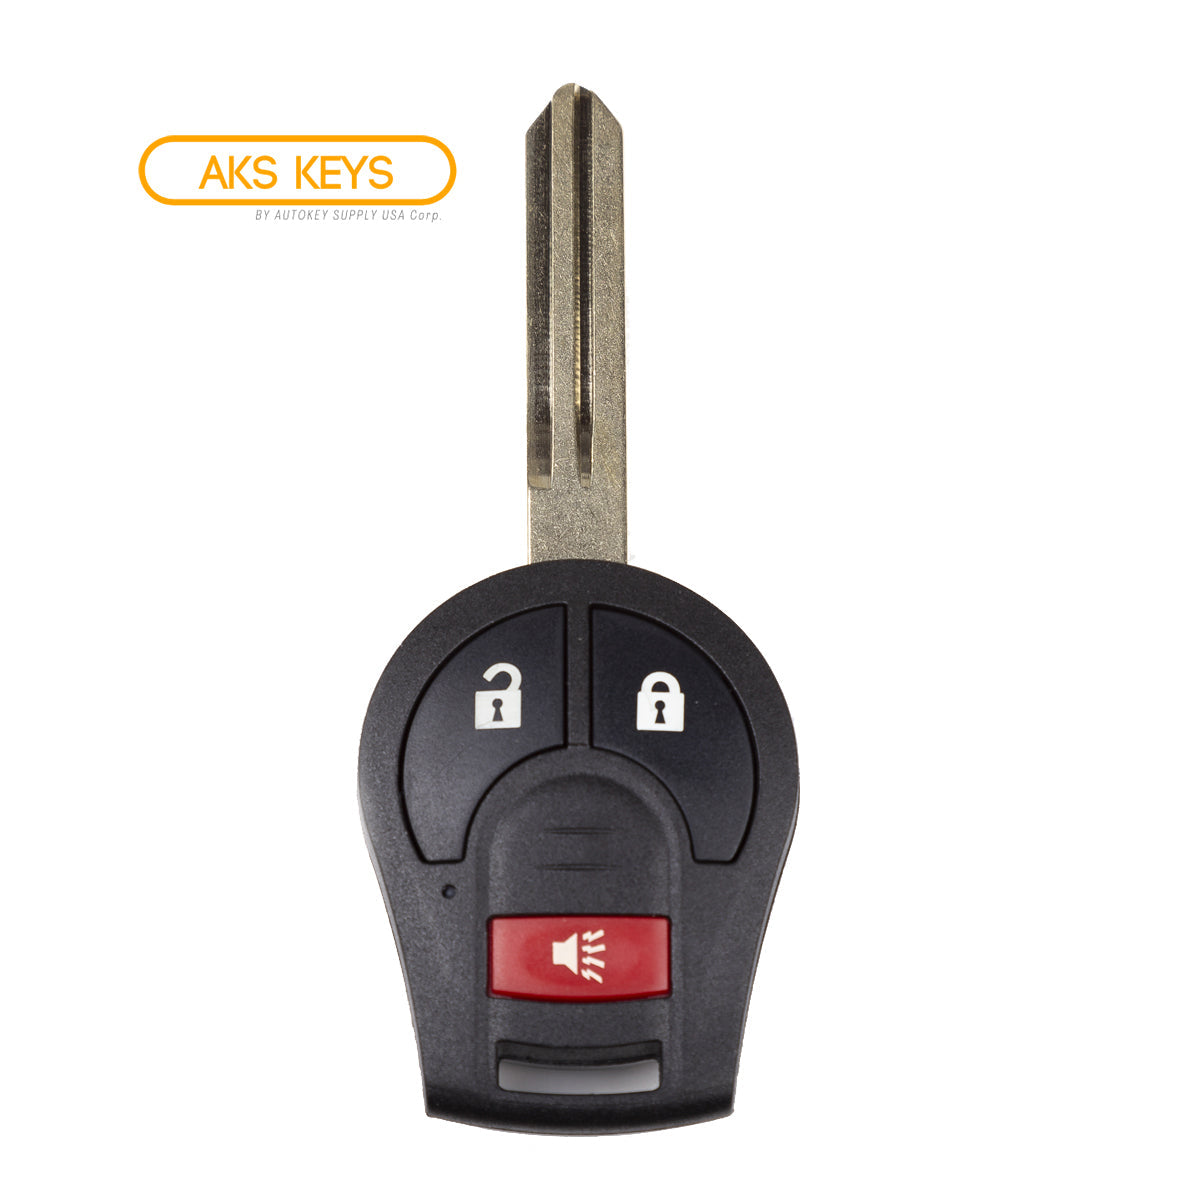 2010 Nissan Rogue Key Fob Replacement - Aftermarket - 3 Buttons Fob FCC# CWTWB1U751